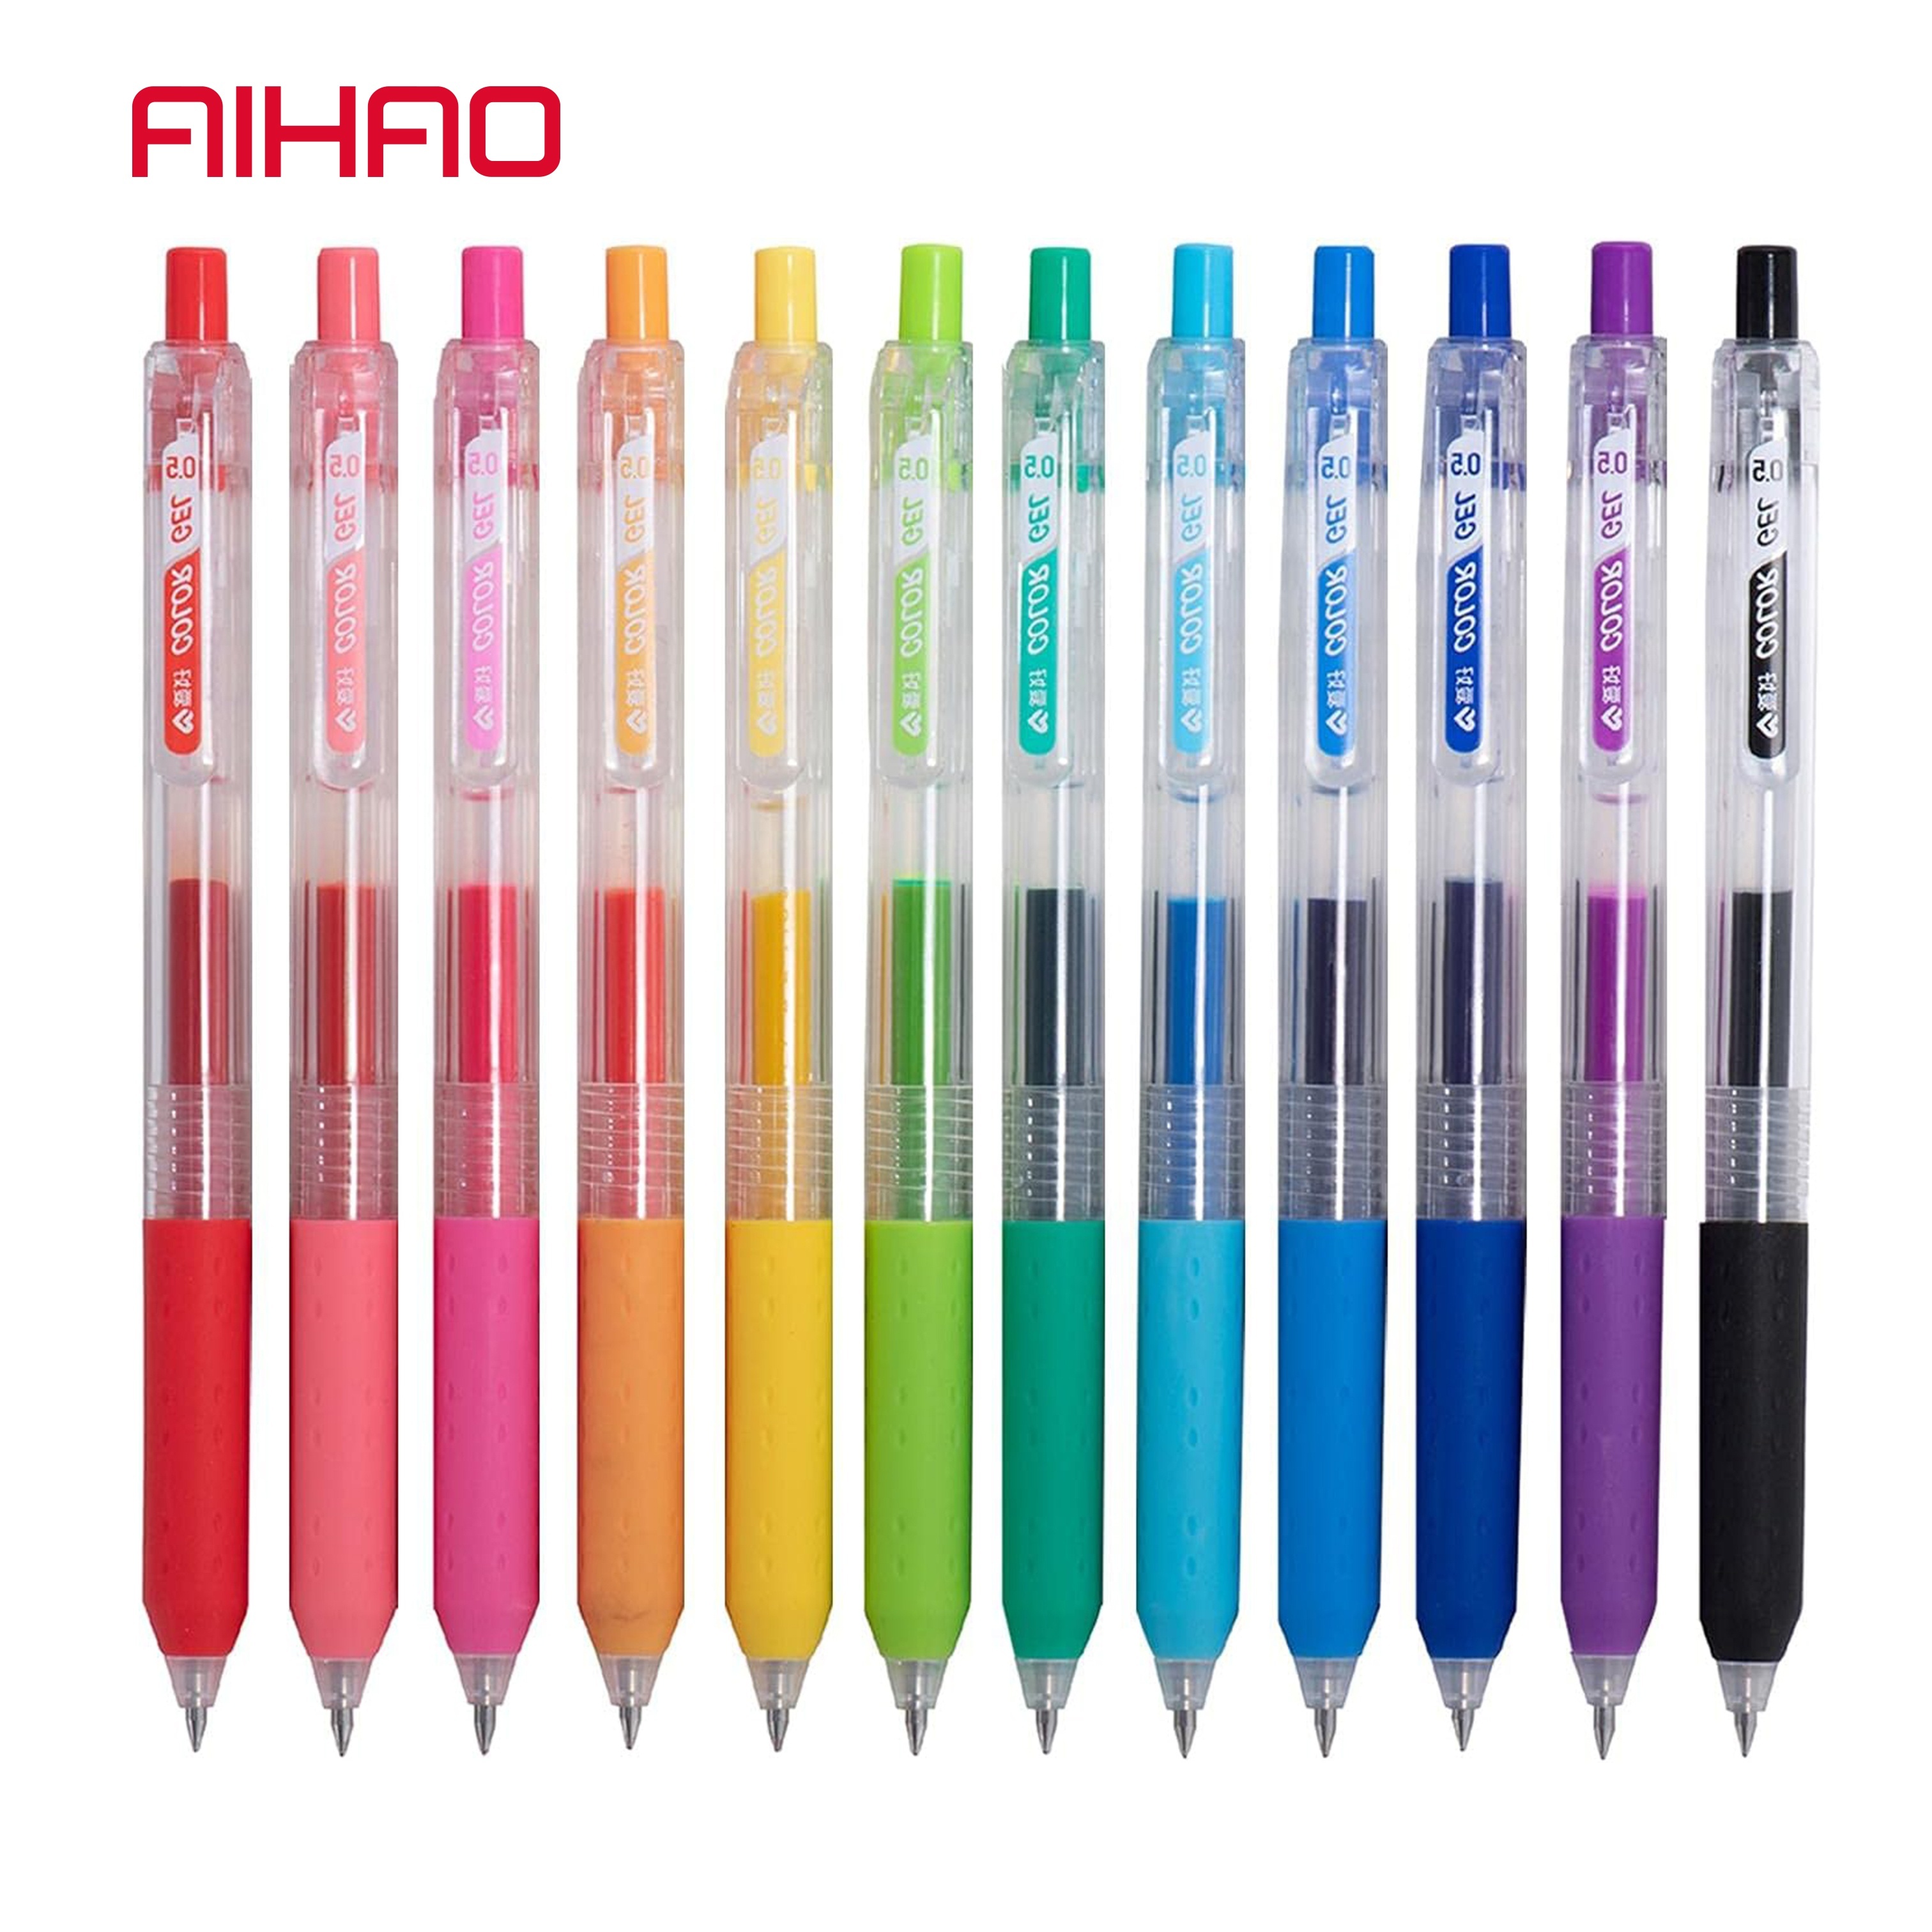 Japanese Style Gel Ink Pen 0.5mm Colorful Fine Ballpoint Maker Pen for  Office School Stationery Supply,Pack of 12, Assorted Colors 